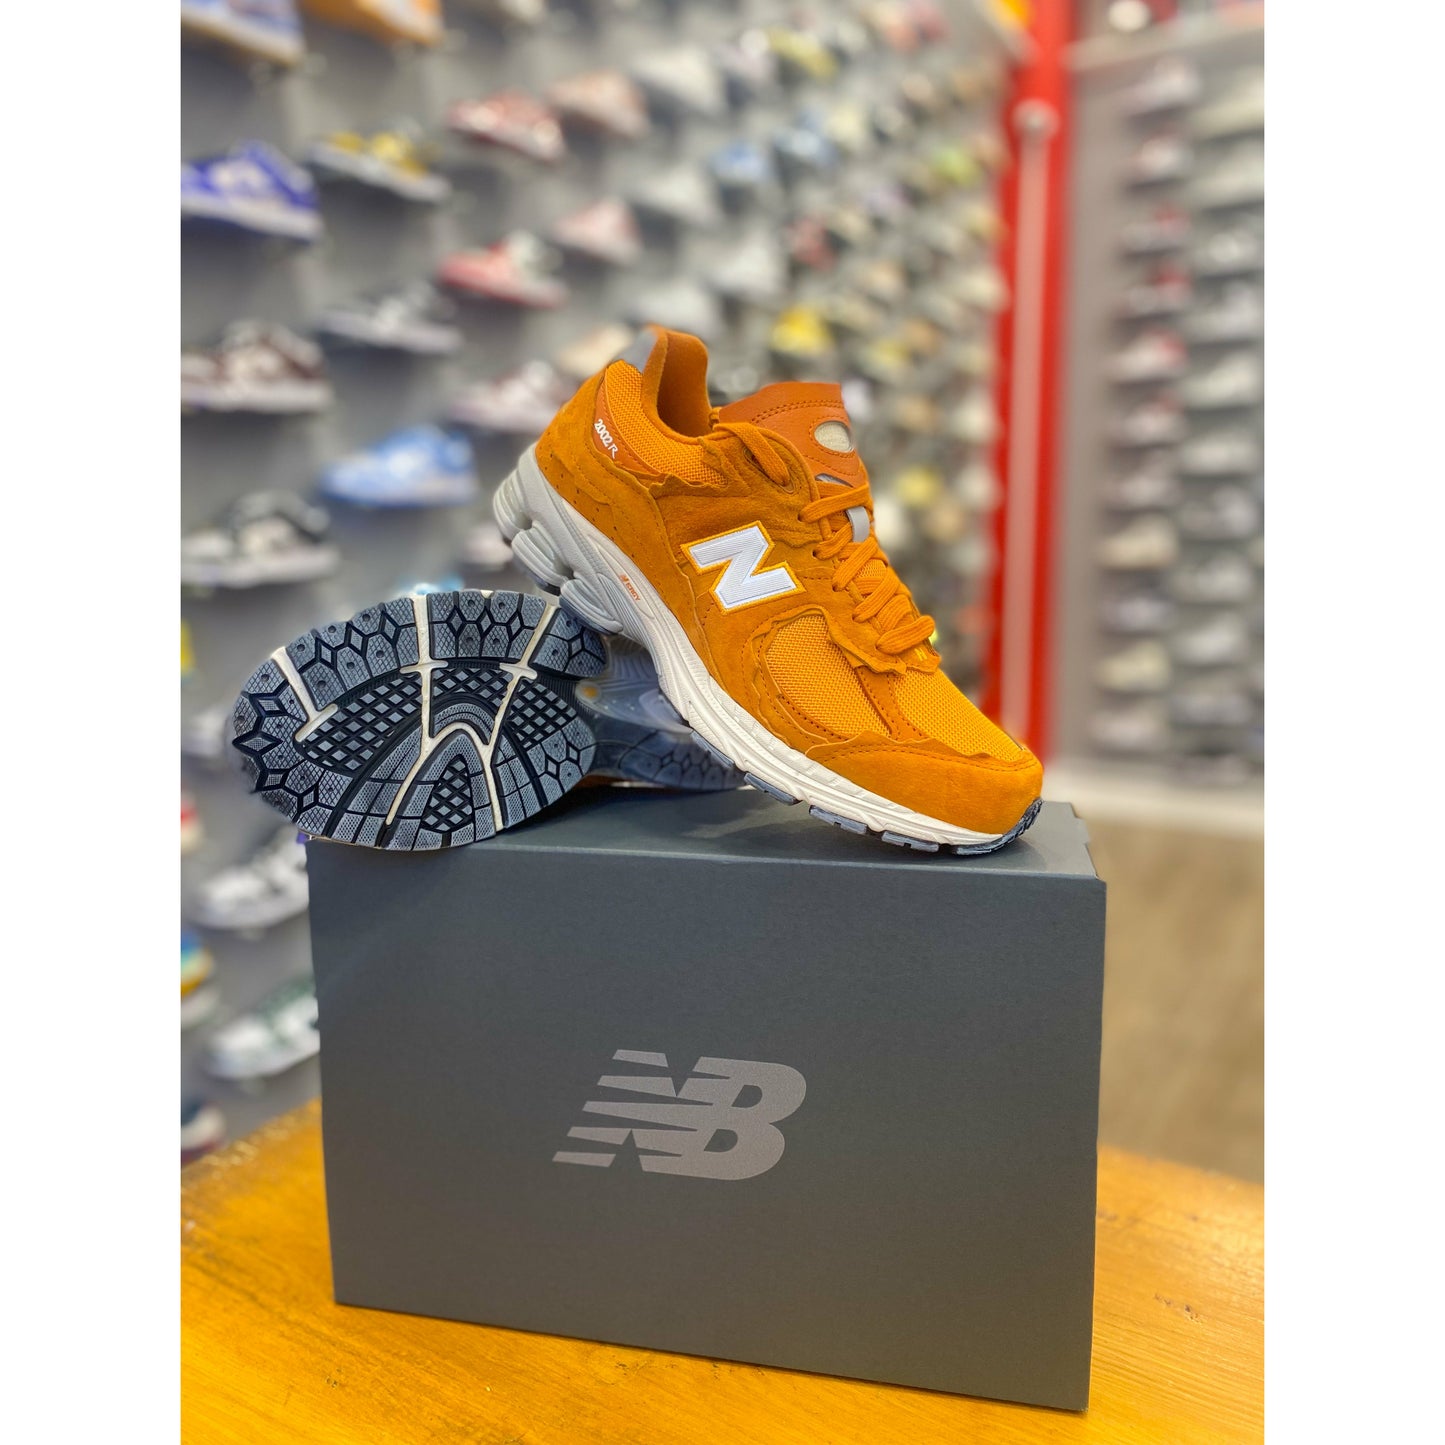 New Balance 2002R Protection Pack Vintage Orange from New Balance